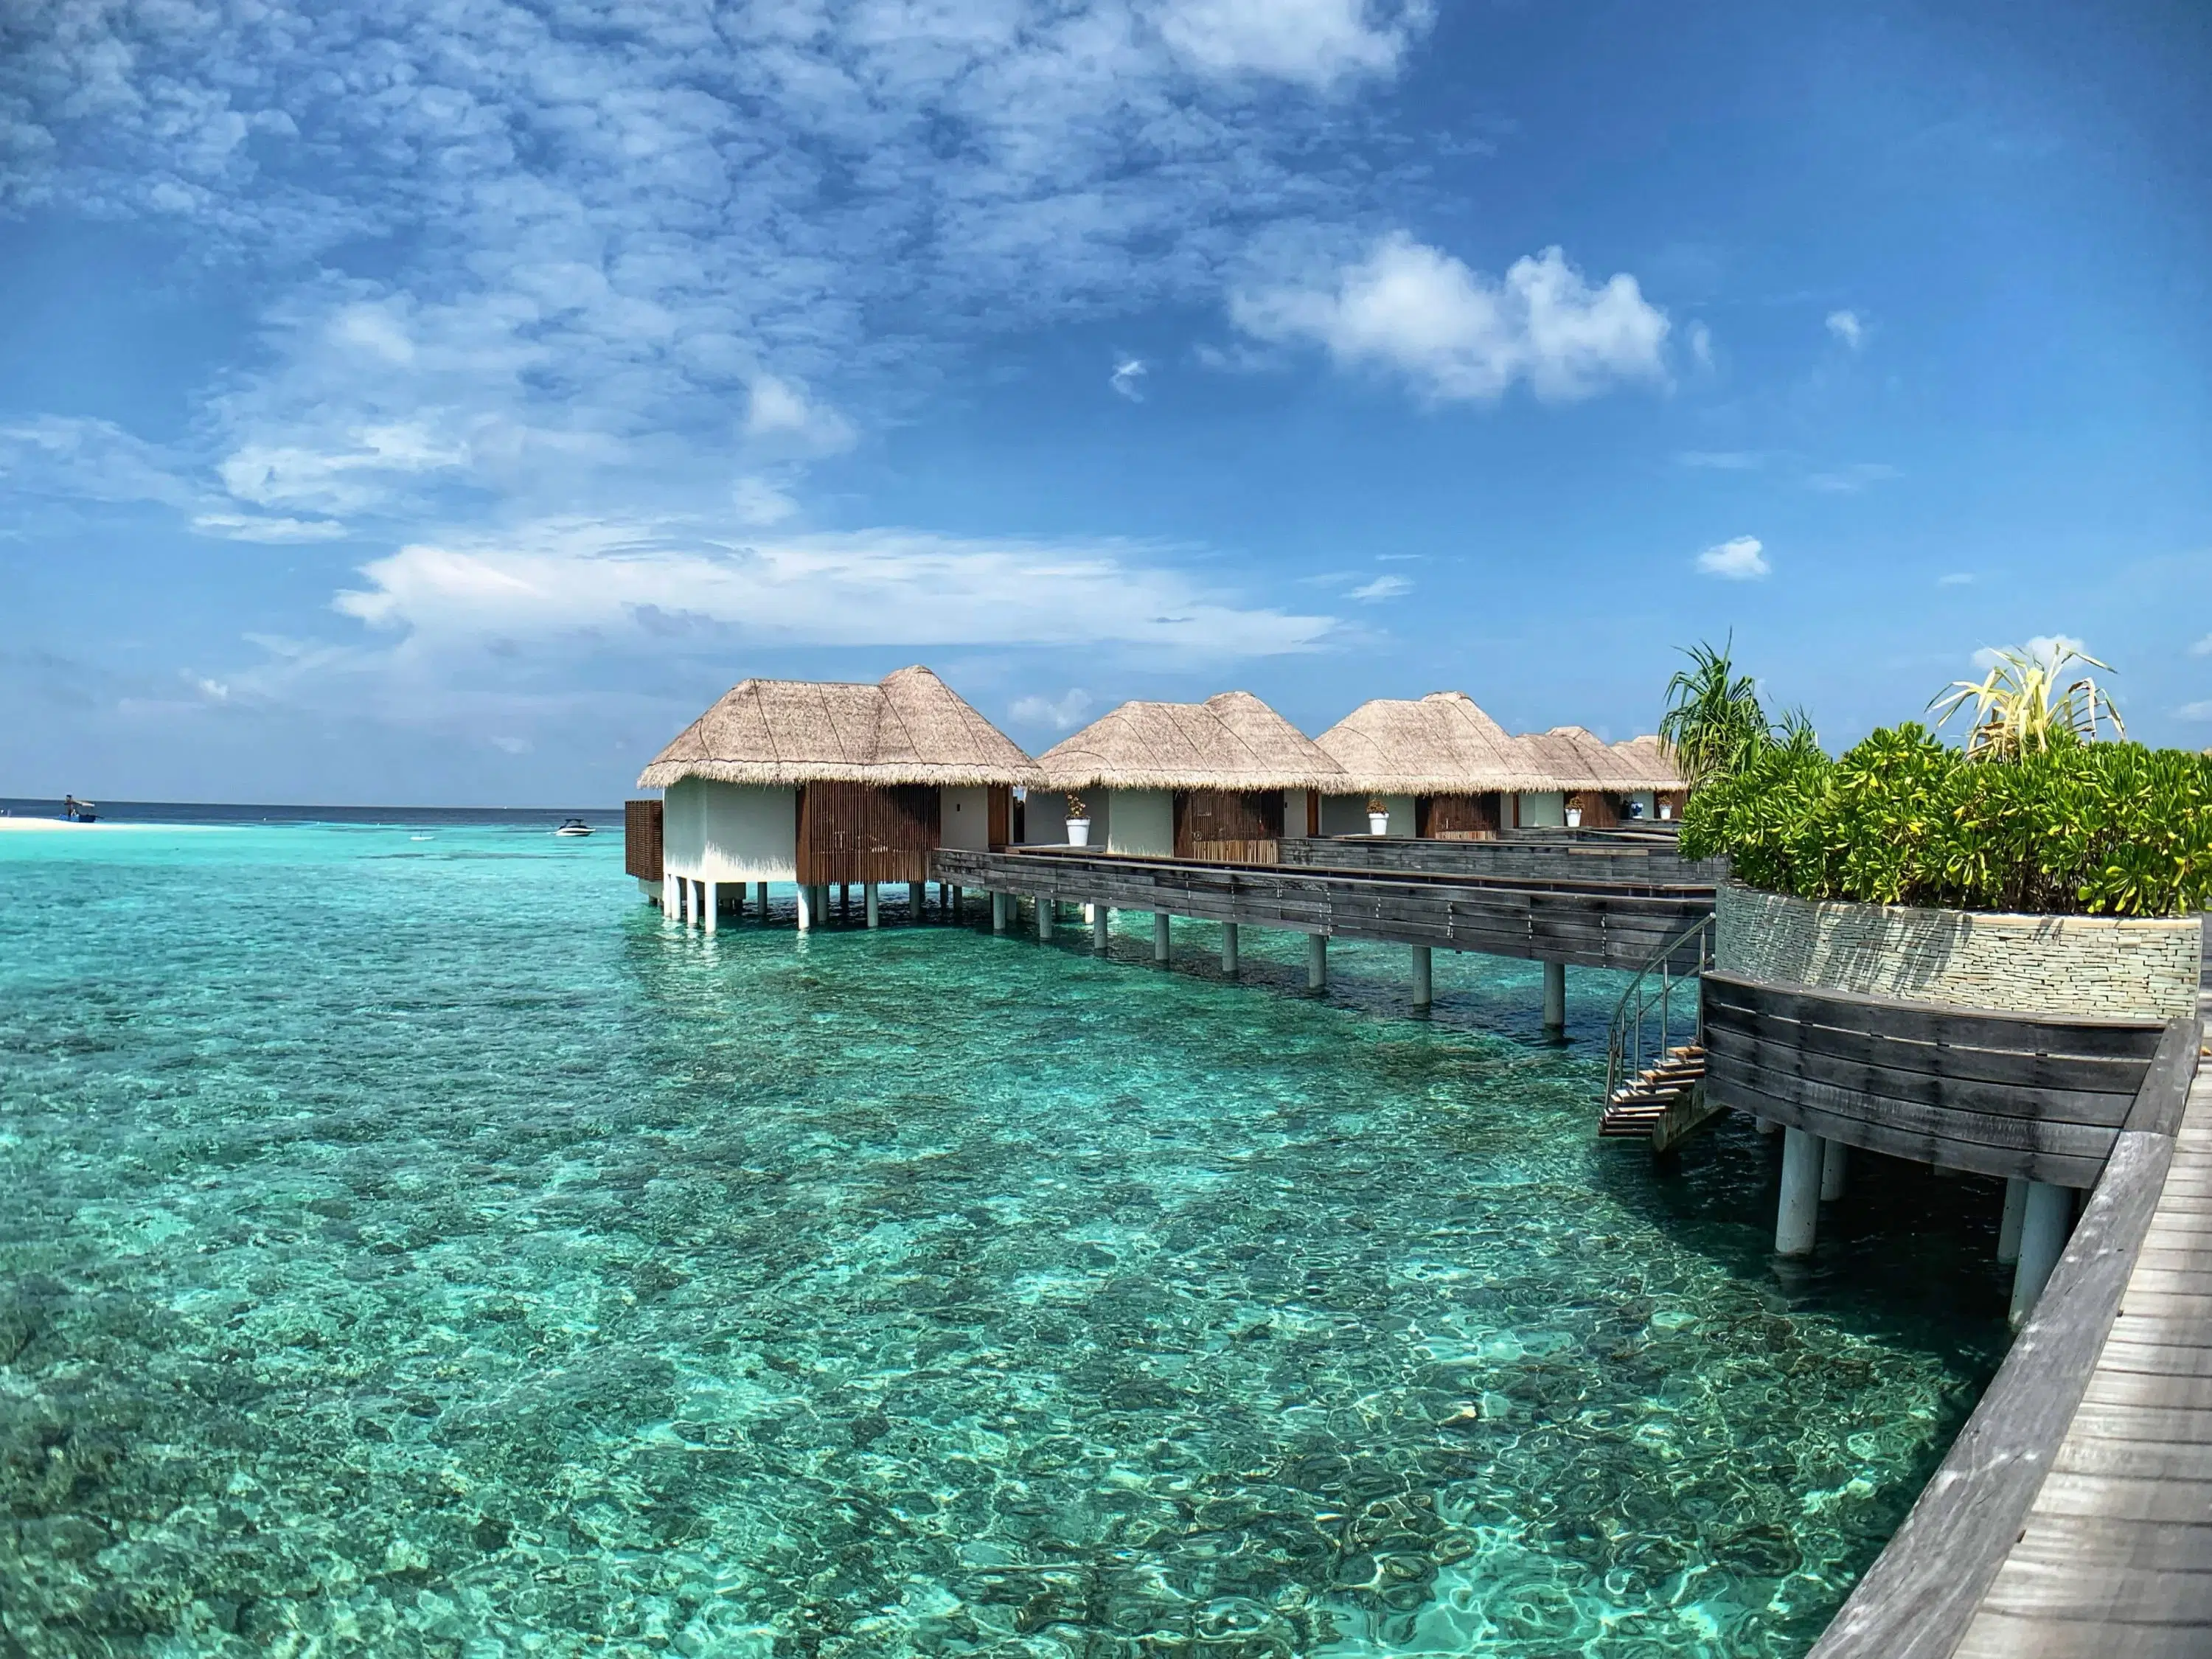 overwater bungalow scaled e1635267150185 - Overwater Bungalows: Here is Everything You Need to Know